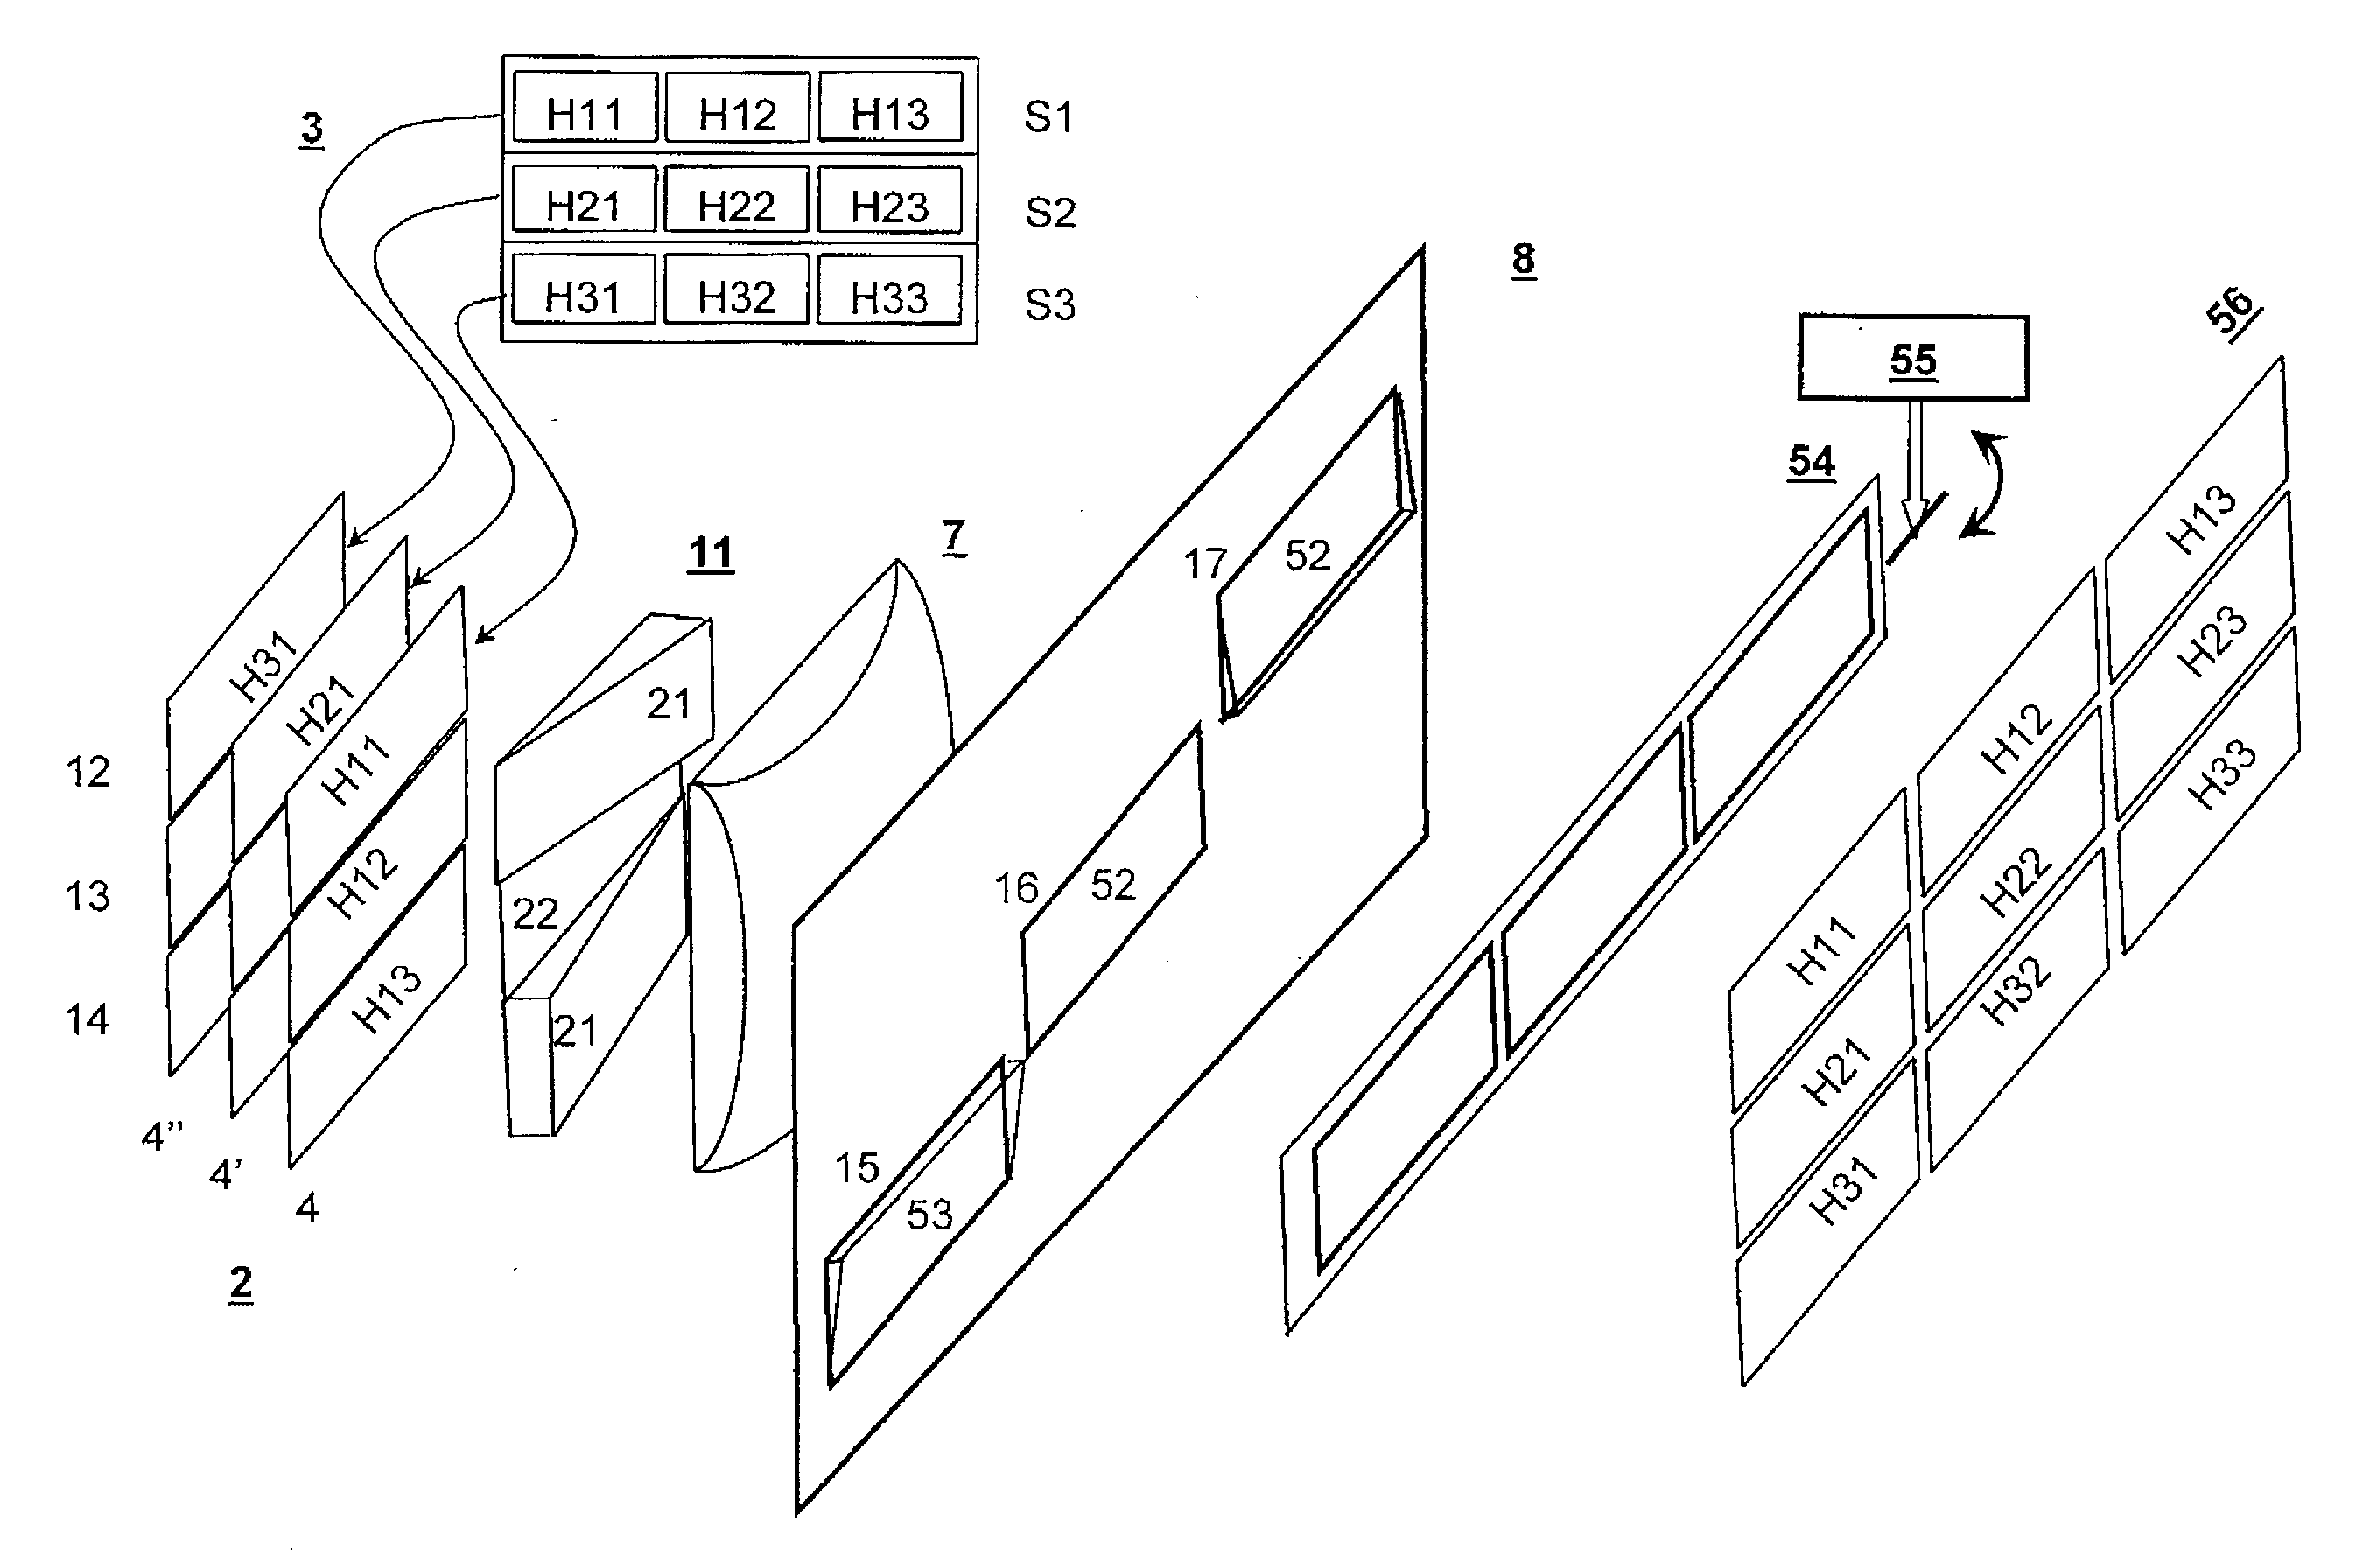 Holographic Reconstruction System Having an Enlarged Visibility Region